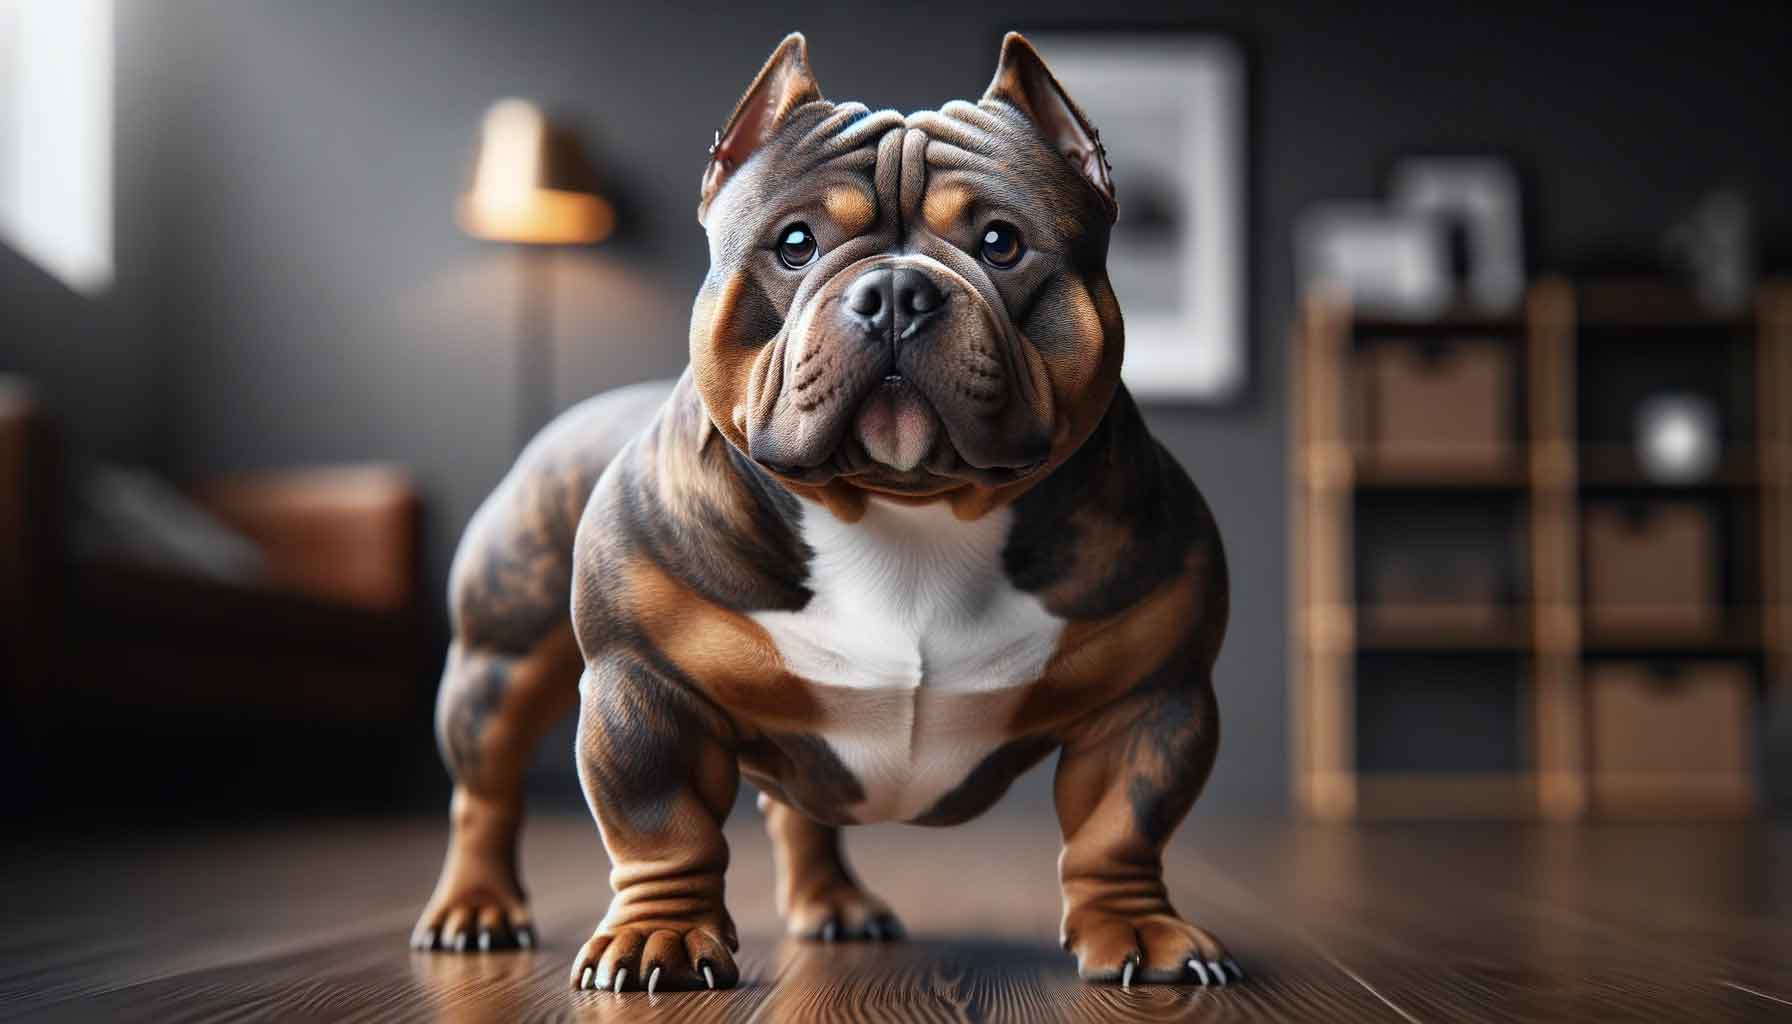 Extreme micro bully with a bulkier build and greater body mass, standing confidently in a well-lit indoor setting.